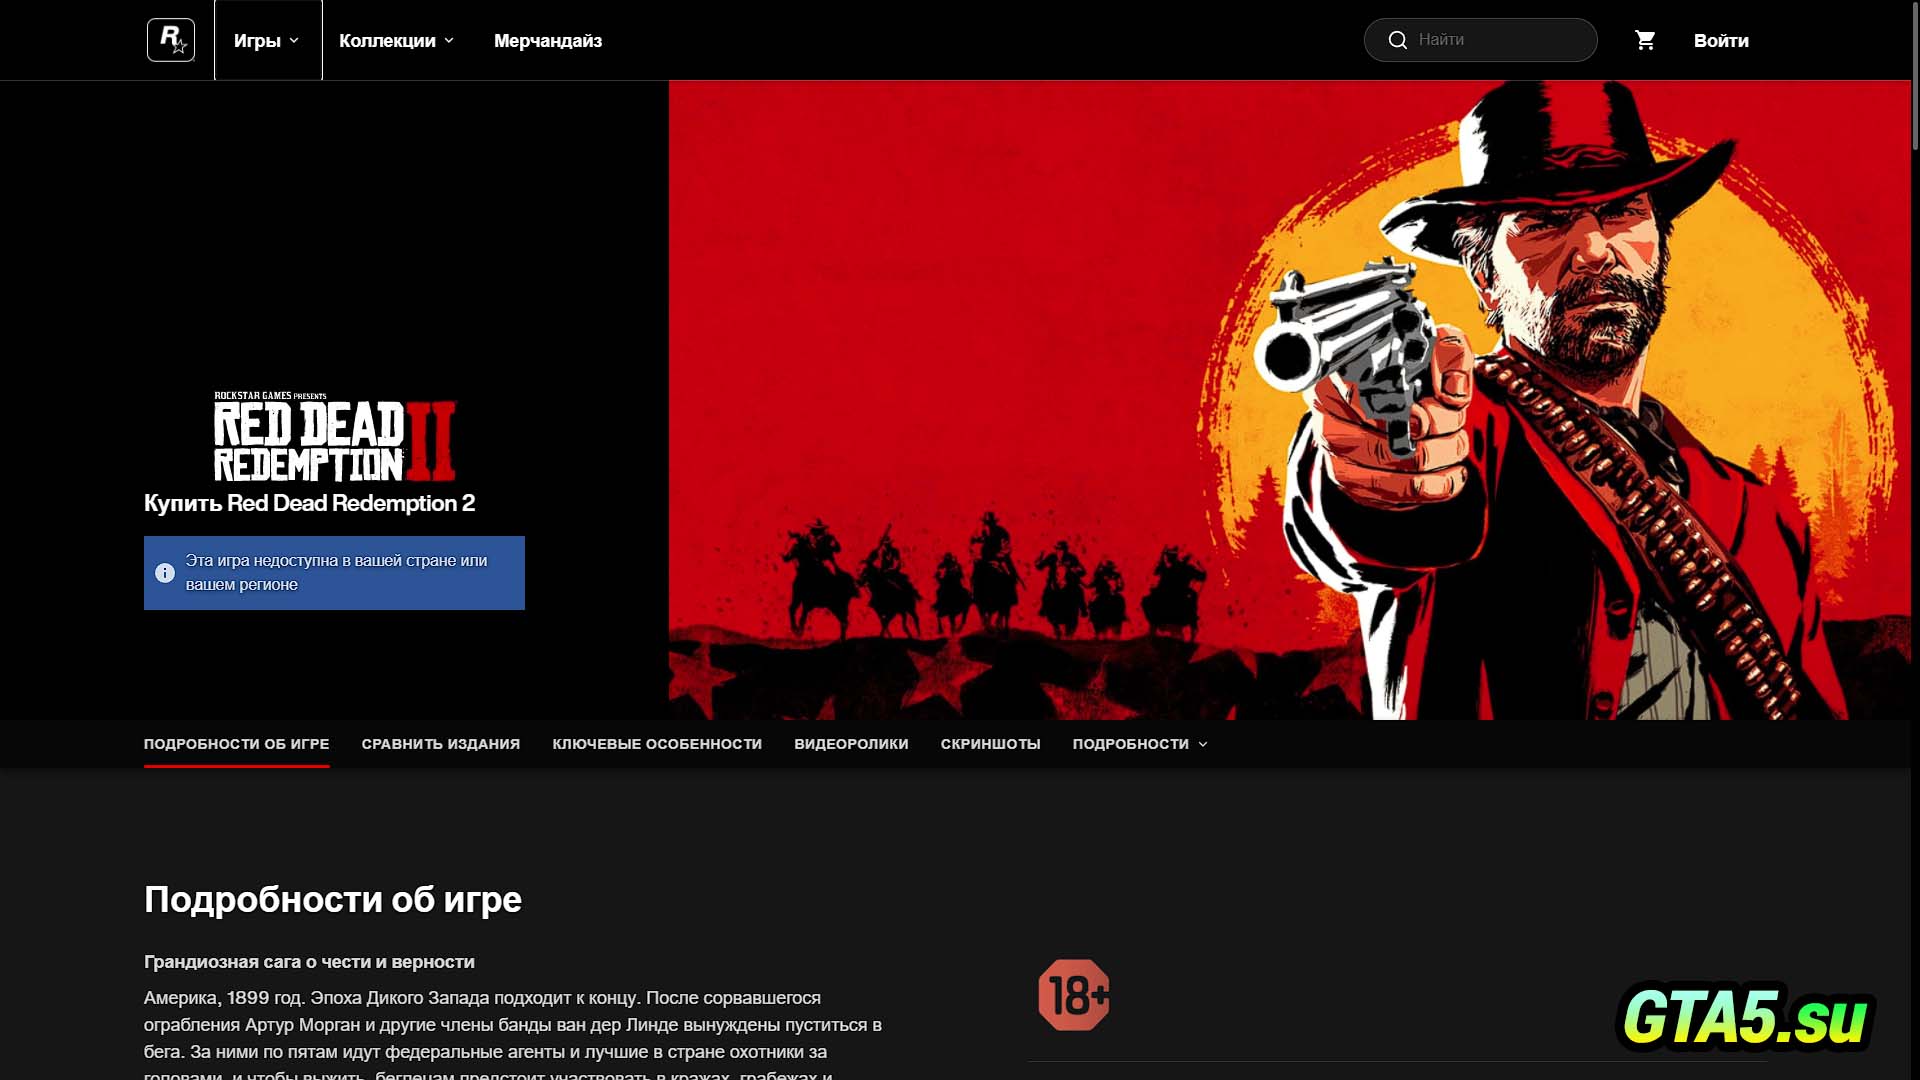 Error could not access game process shutdown rockstar games launcher and steam epic games store фото 48